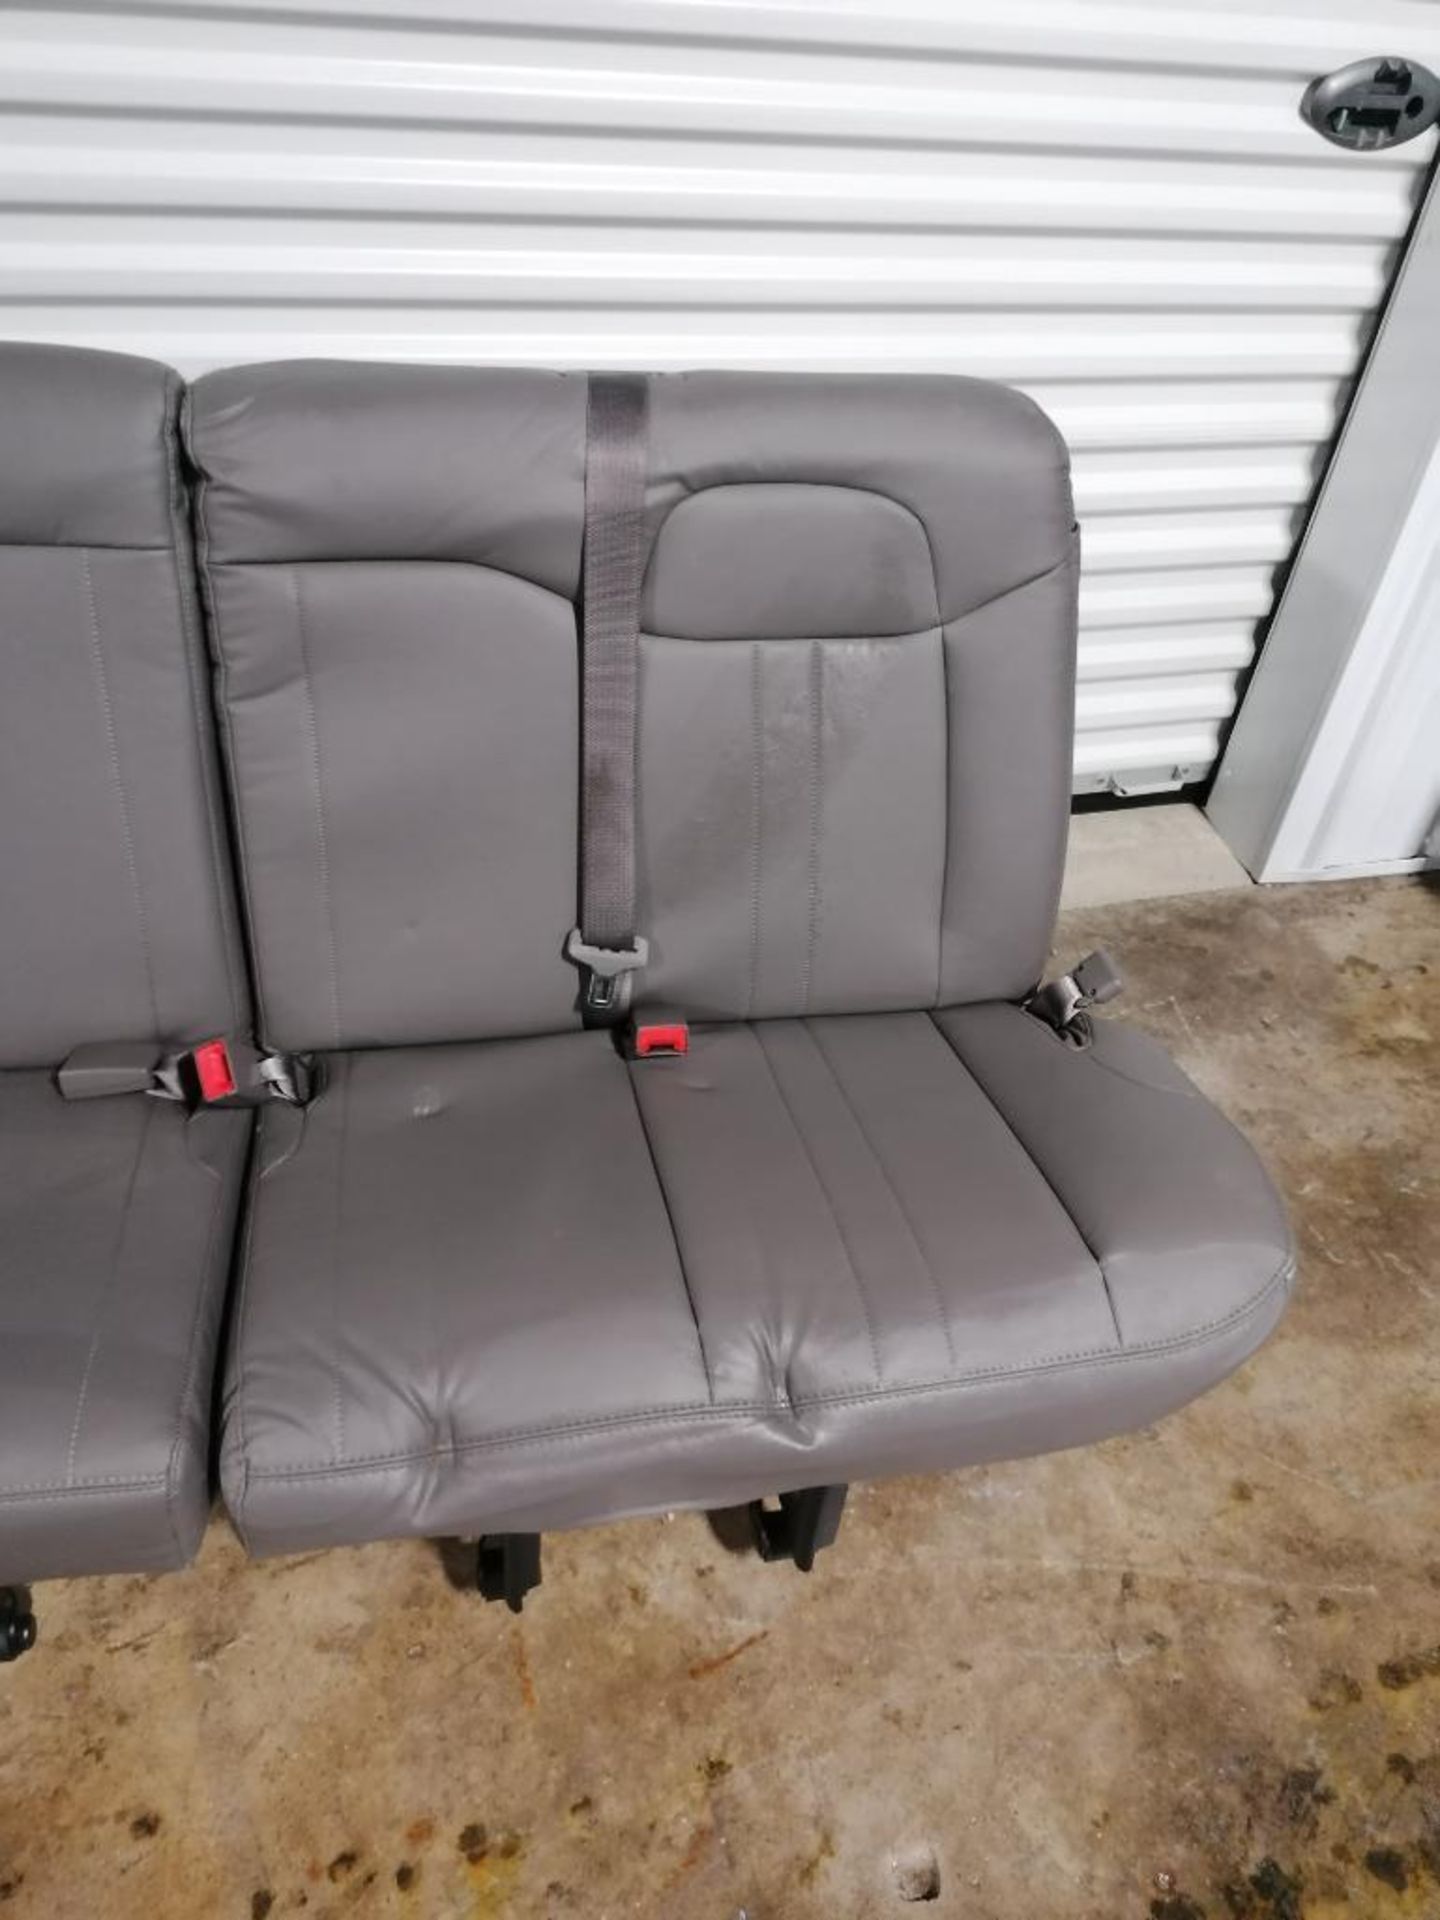 NEW 2021 Chevrolet Express Passenger Seat Row. Located in Mt. Pleasant, IA. - Image 3 of 4